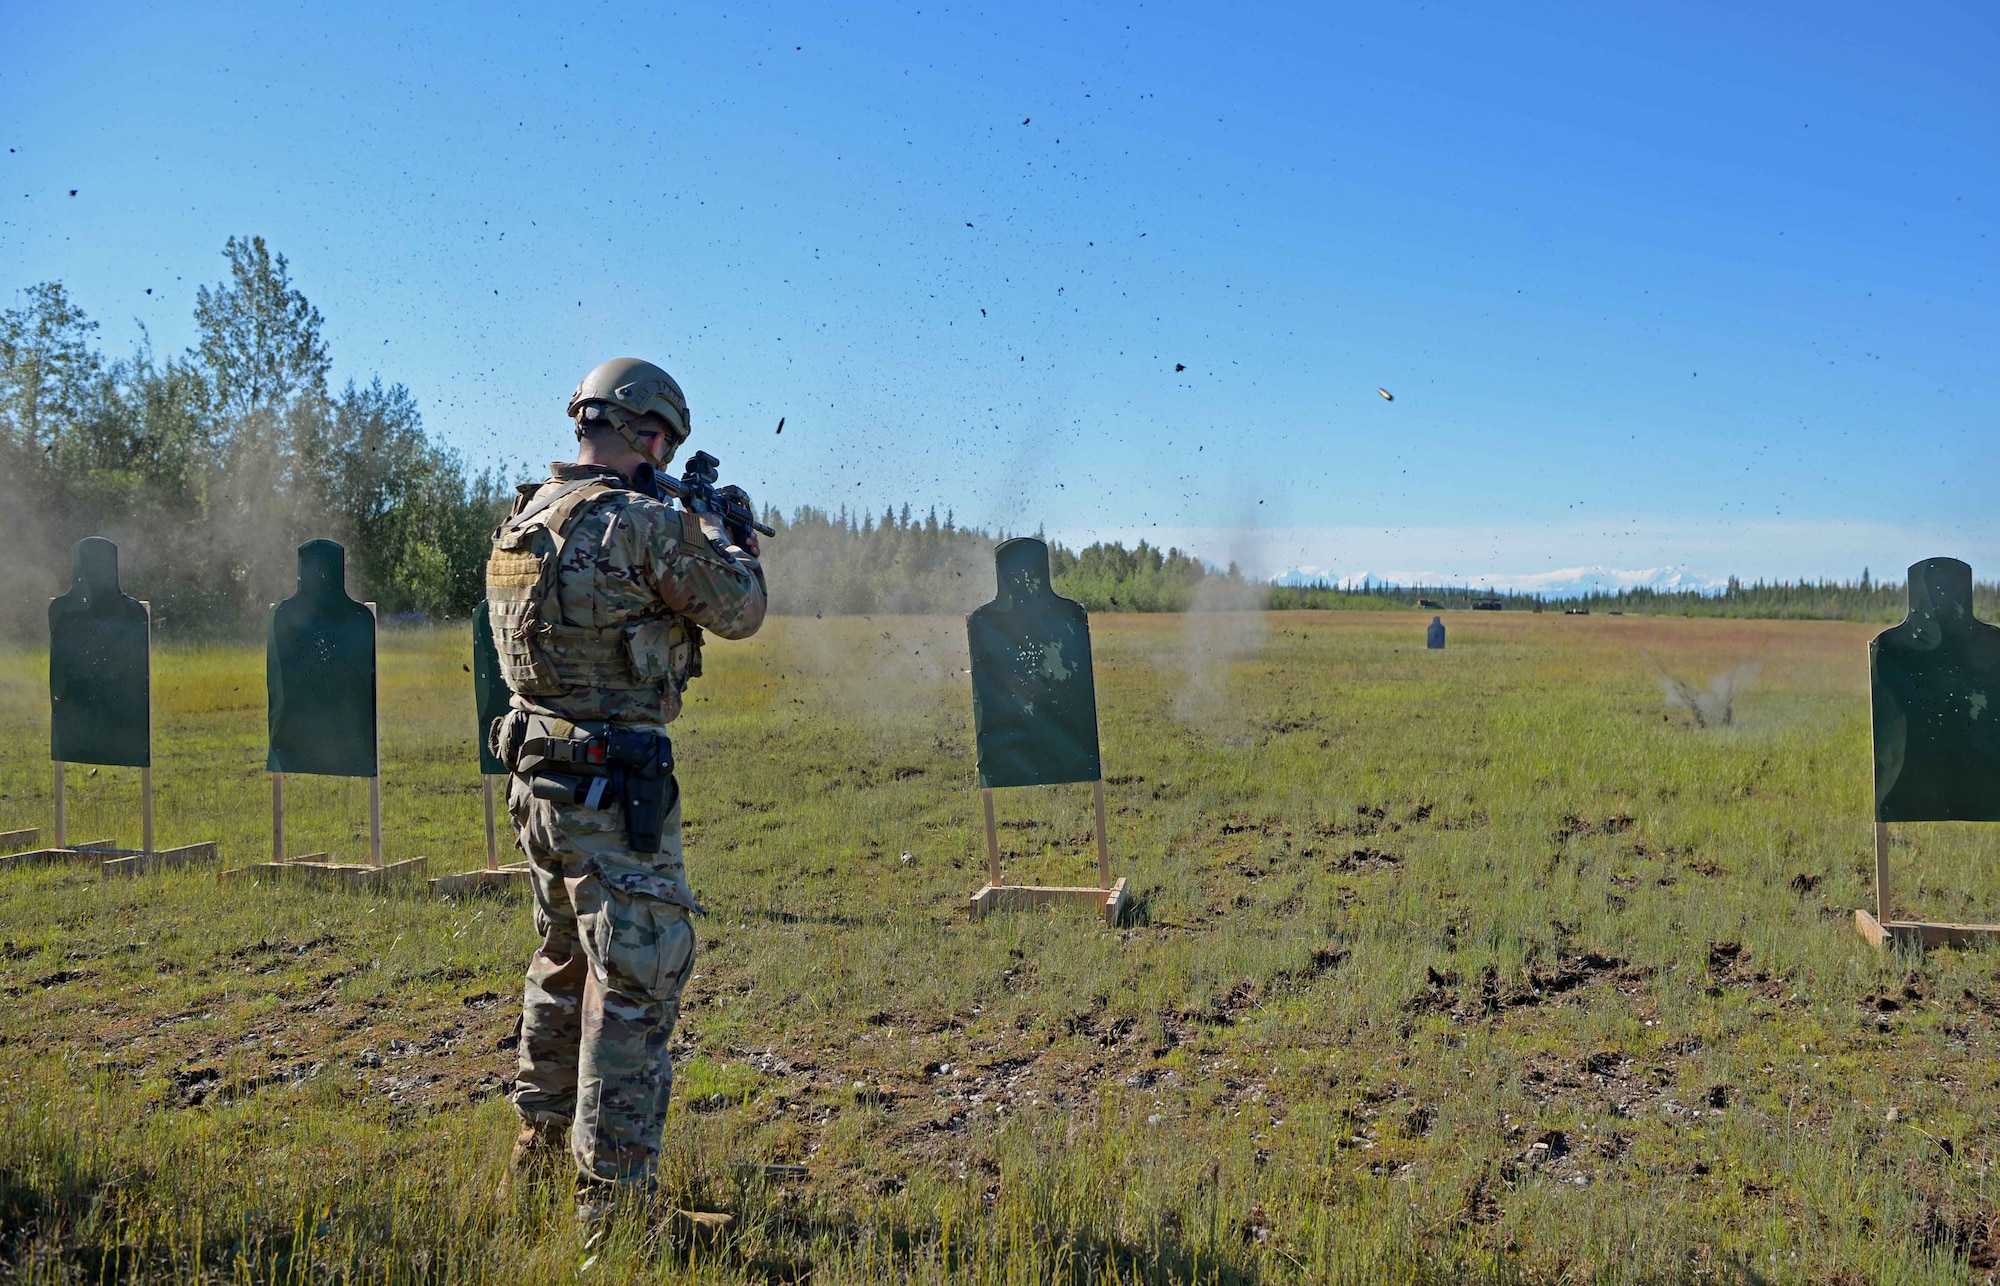 A U.S. Air Force Airman from the 354th Security Forces Squadron fires his weapon at a target during special weapons and tactics training June 23, 2021 on Eielson Air Force Base, Alaska. Defenders trained with handguns and rifles to familiarize themselves with different types of weapon platforms to become more adaptable in the event of an emergency. (U.S. Air Force photo by Senior Airman Beaux Hebert)